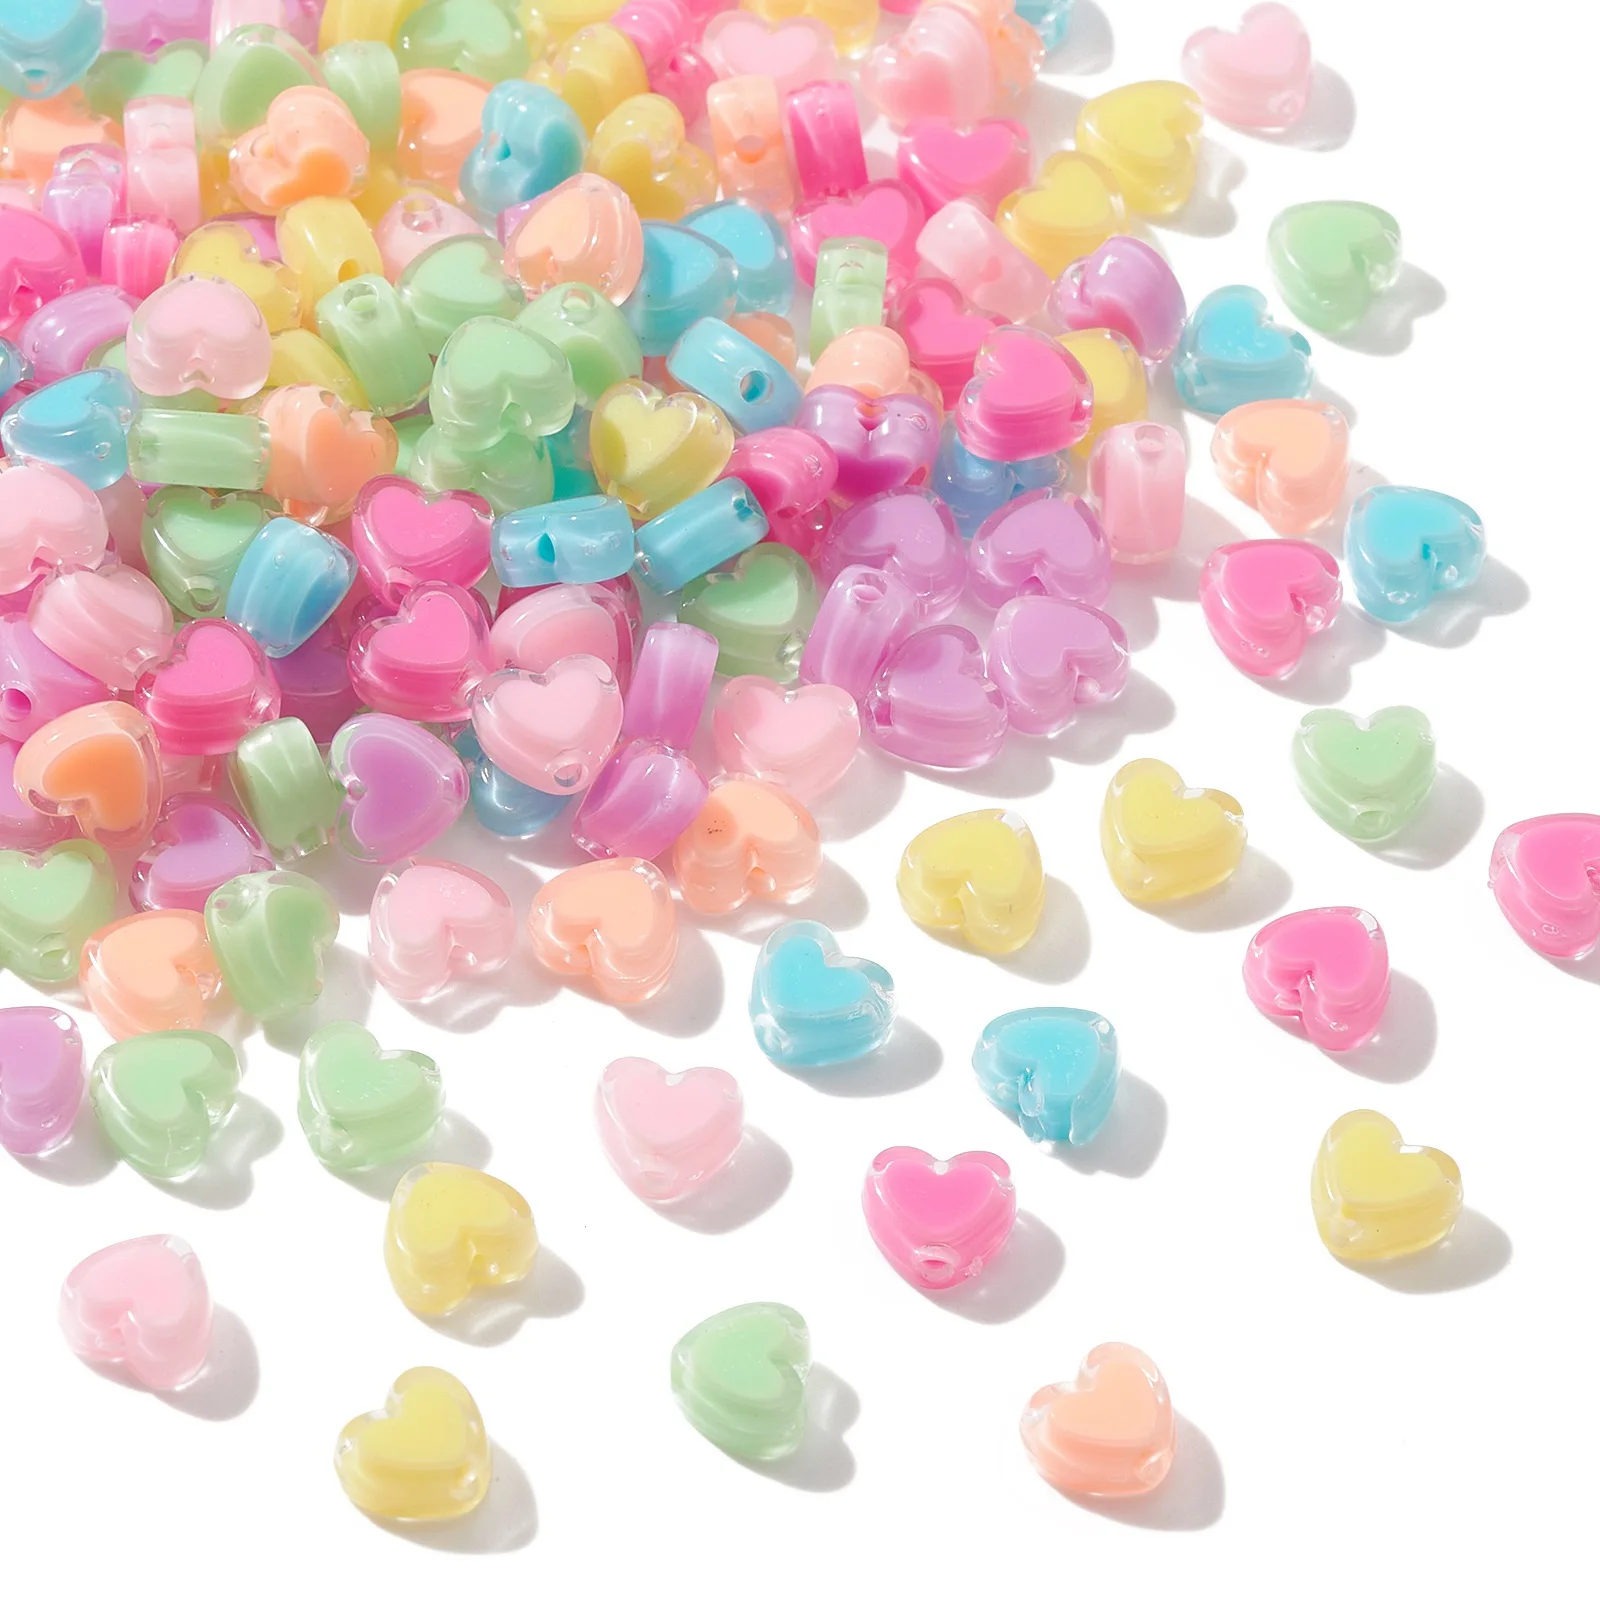 

200Pcs Random Color Acrylic Heart Shape Beads Colorful Bead in Bead Spacer Beads for Valentine's Day Jewelry Making DIY Craft